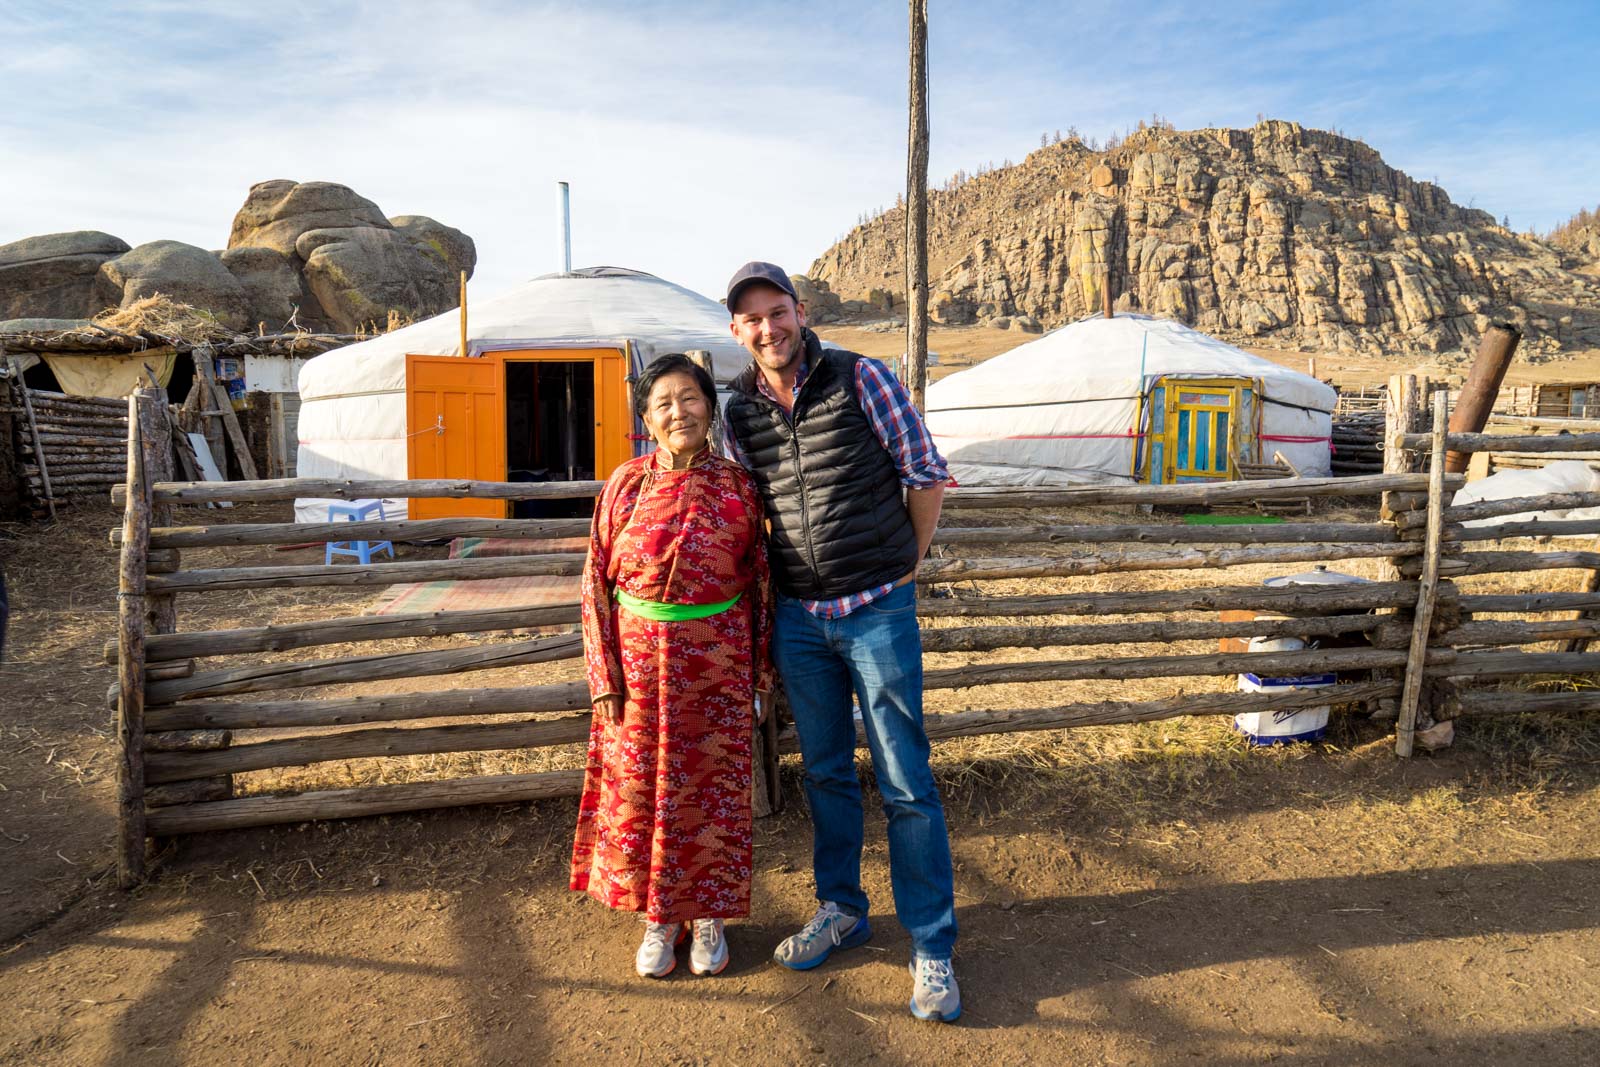 Nomadic life in Mongolia: What is it like?